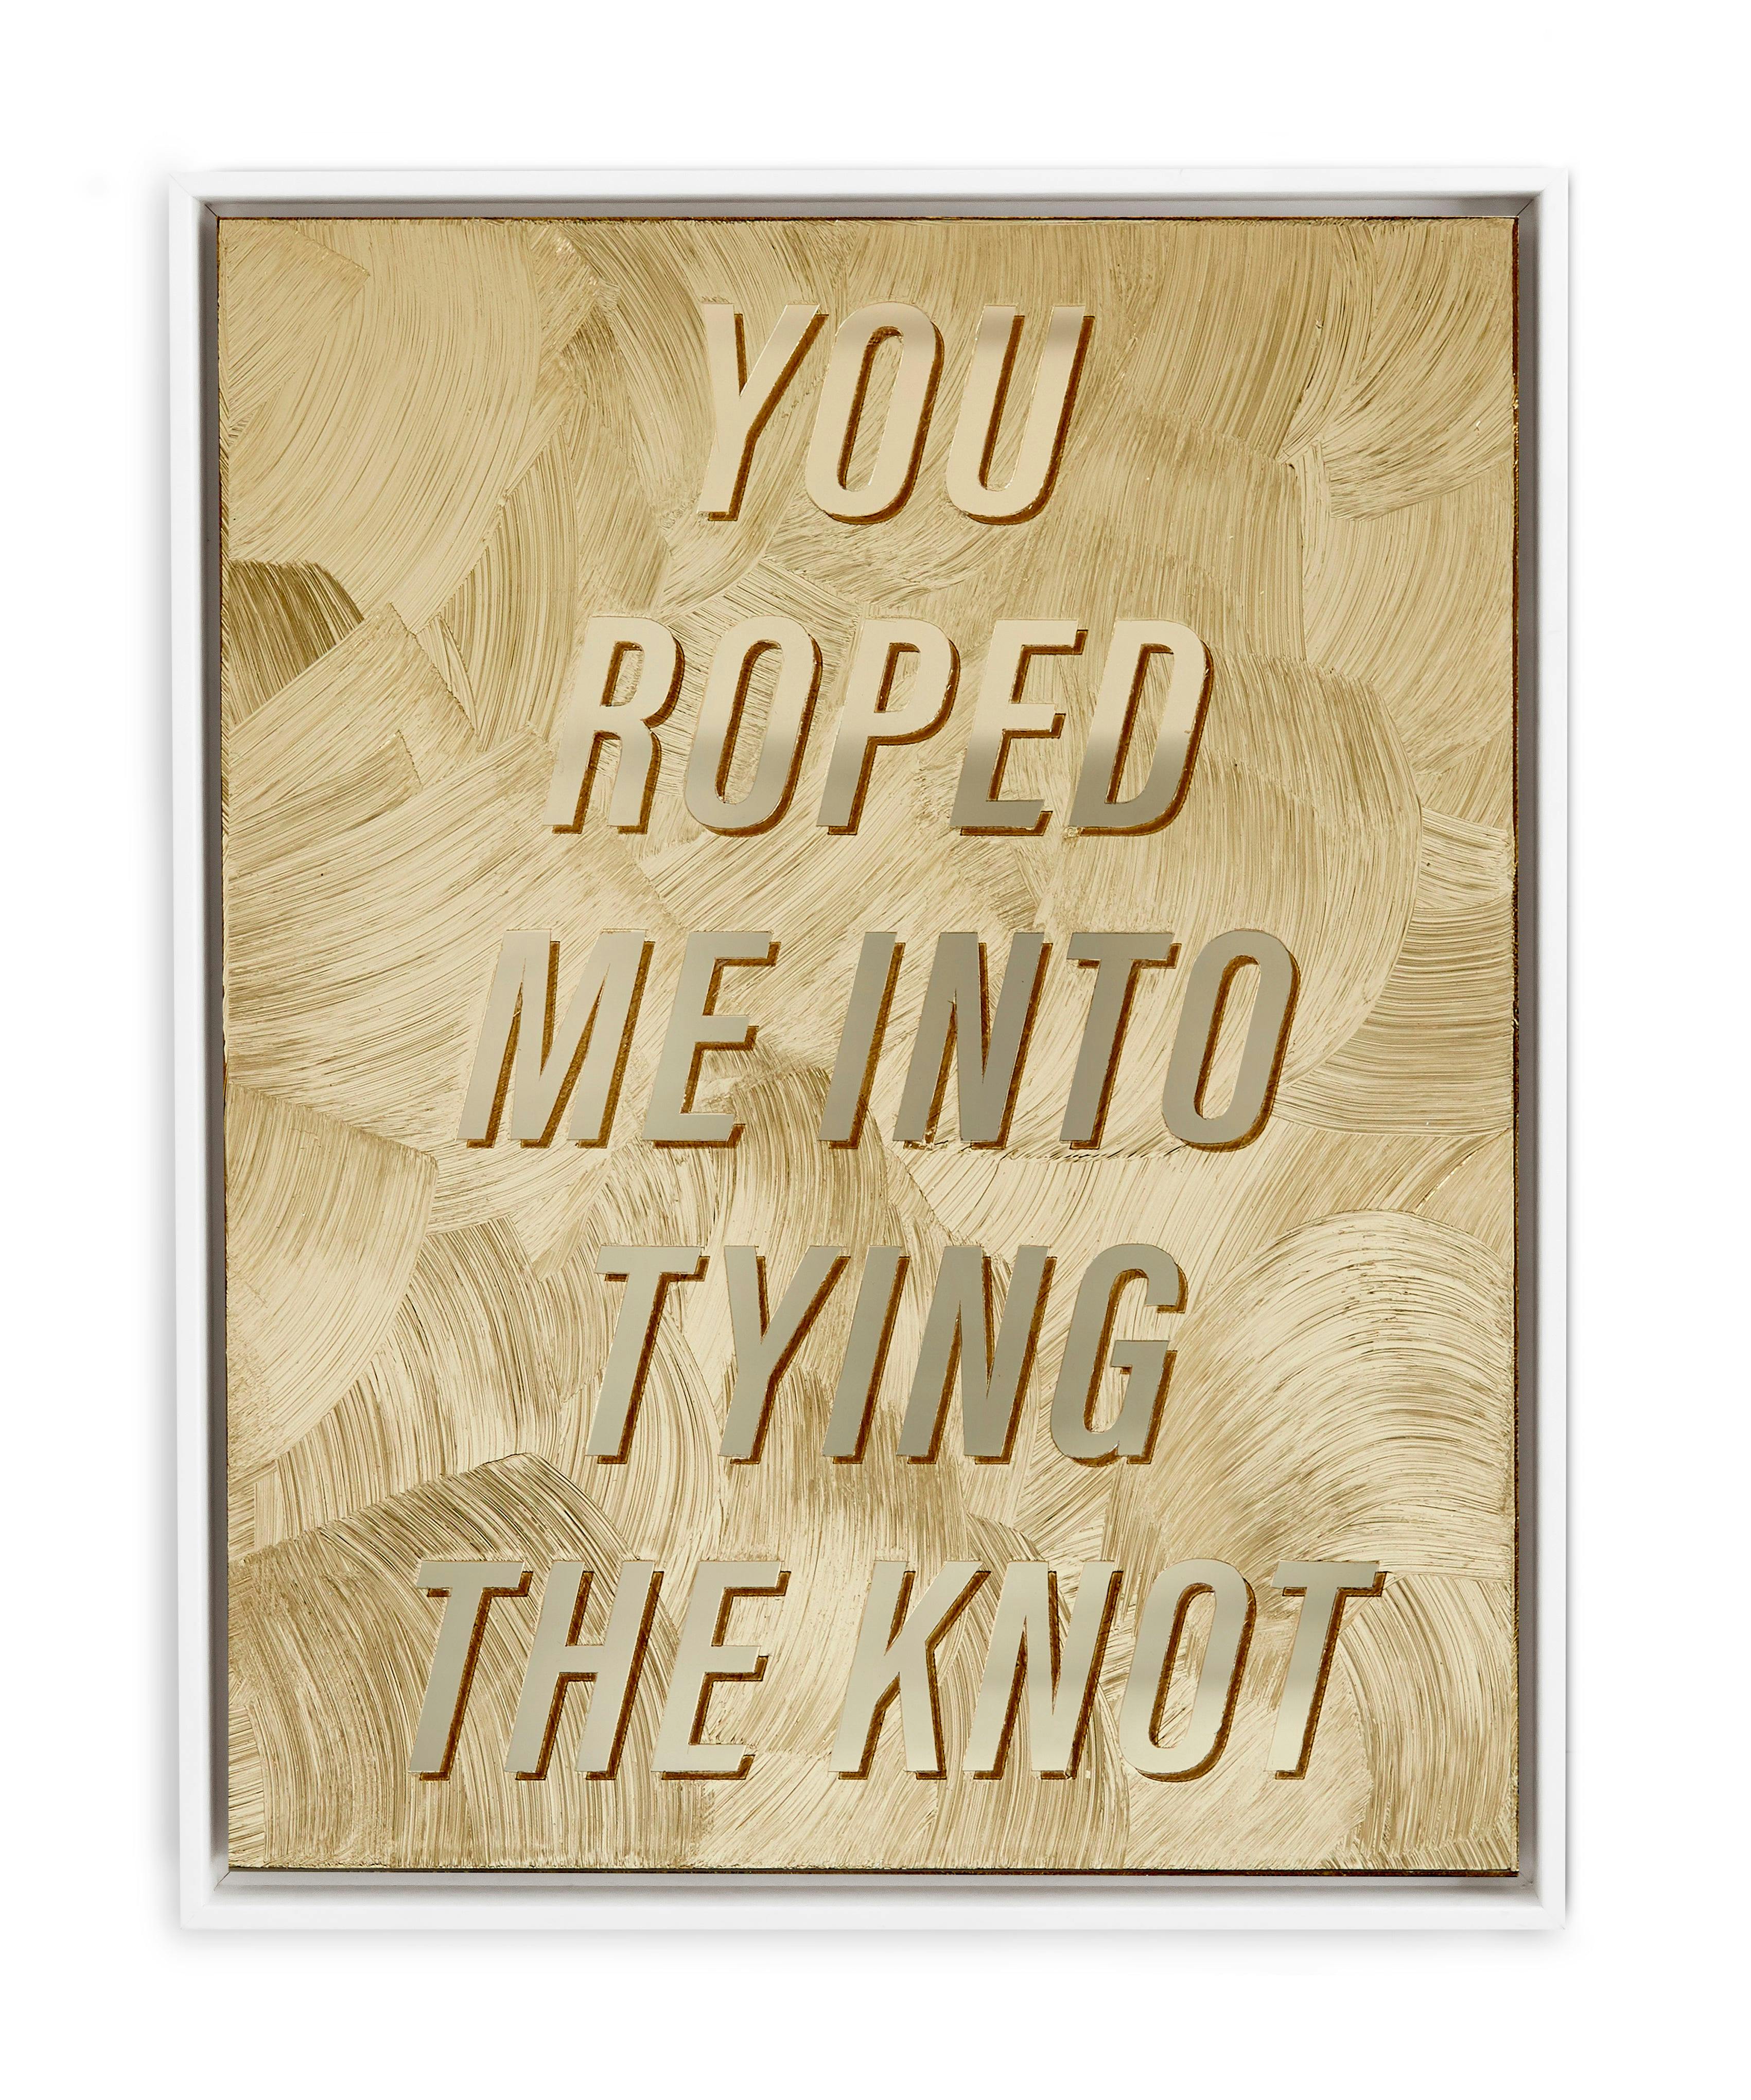 Mixed Media by Ben Skinner titled "You Roped Me Into".